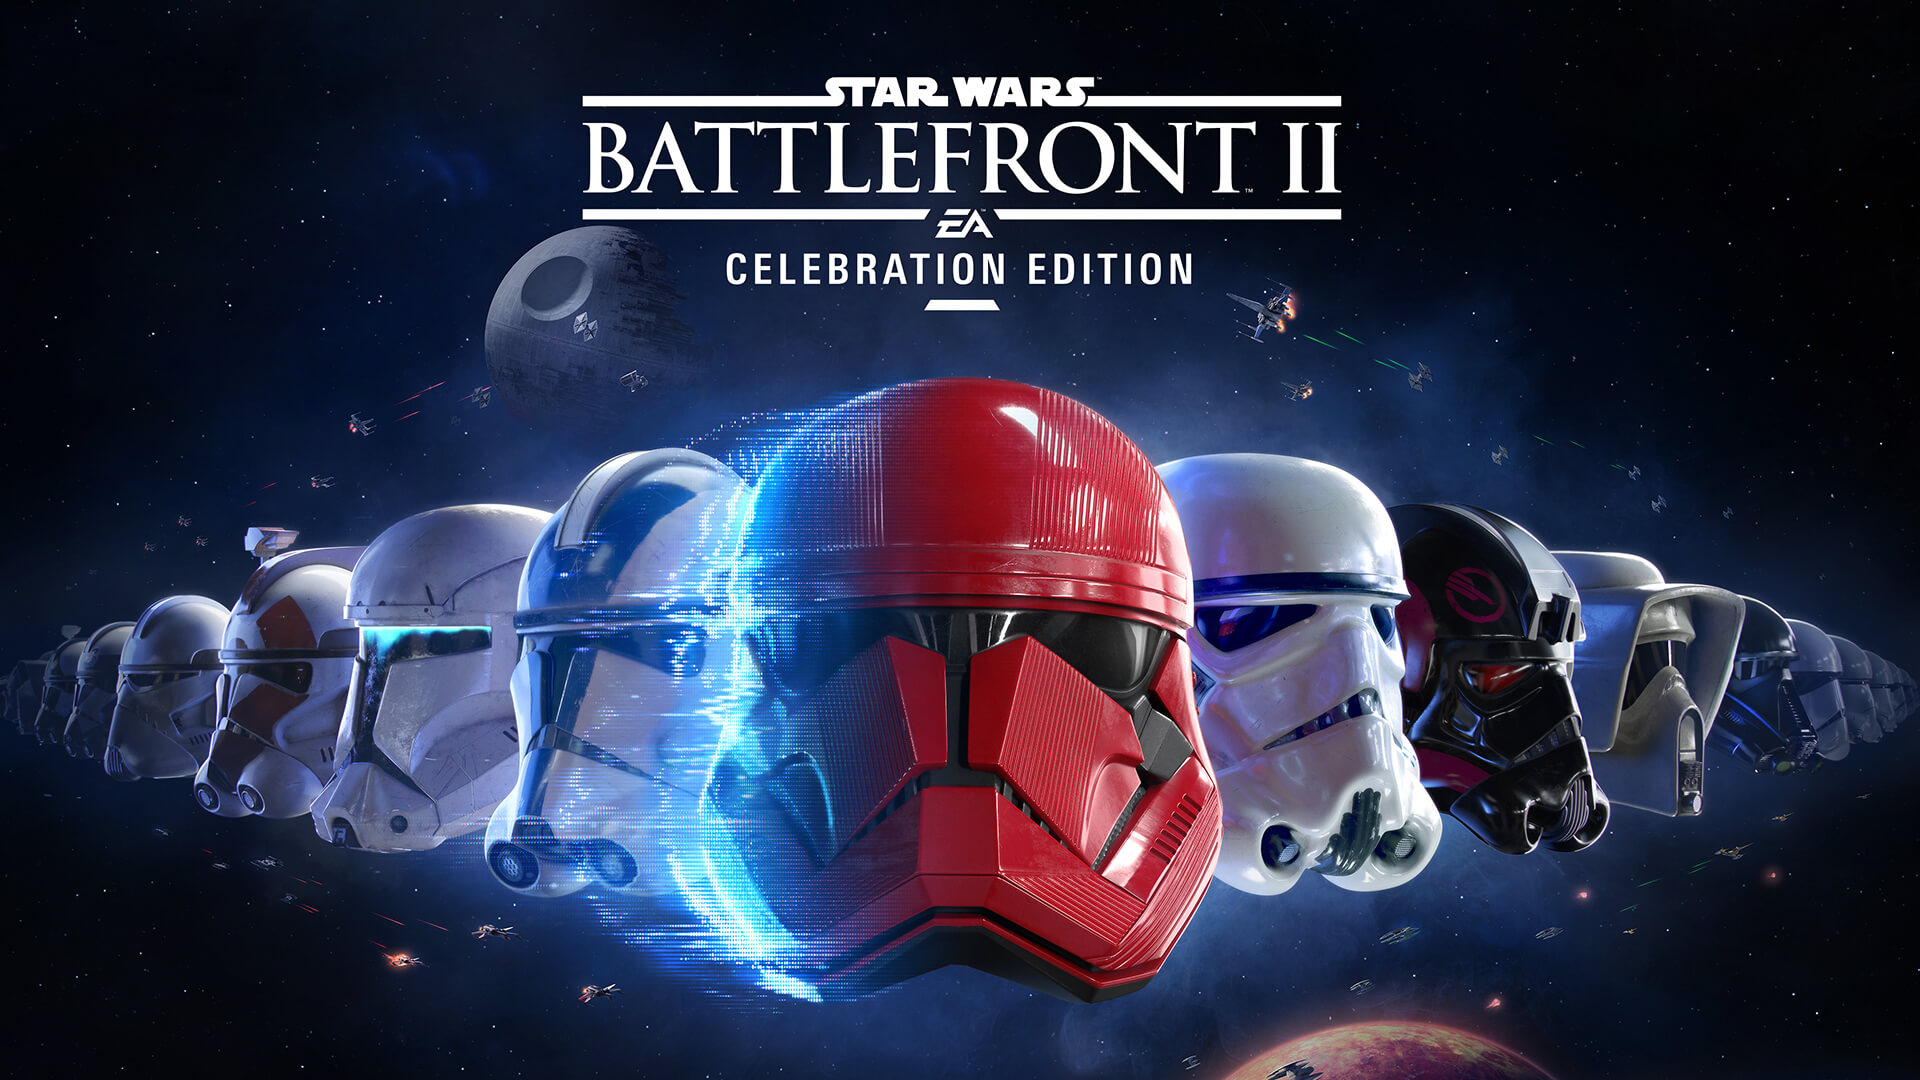 Star Wars: Battlefront II Full Game PC for Free